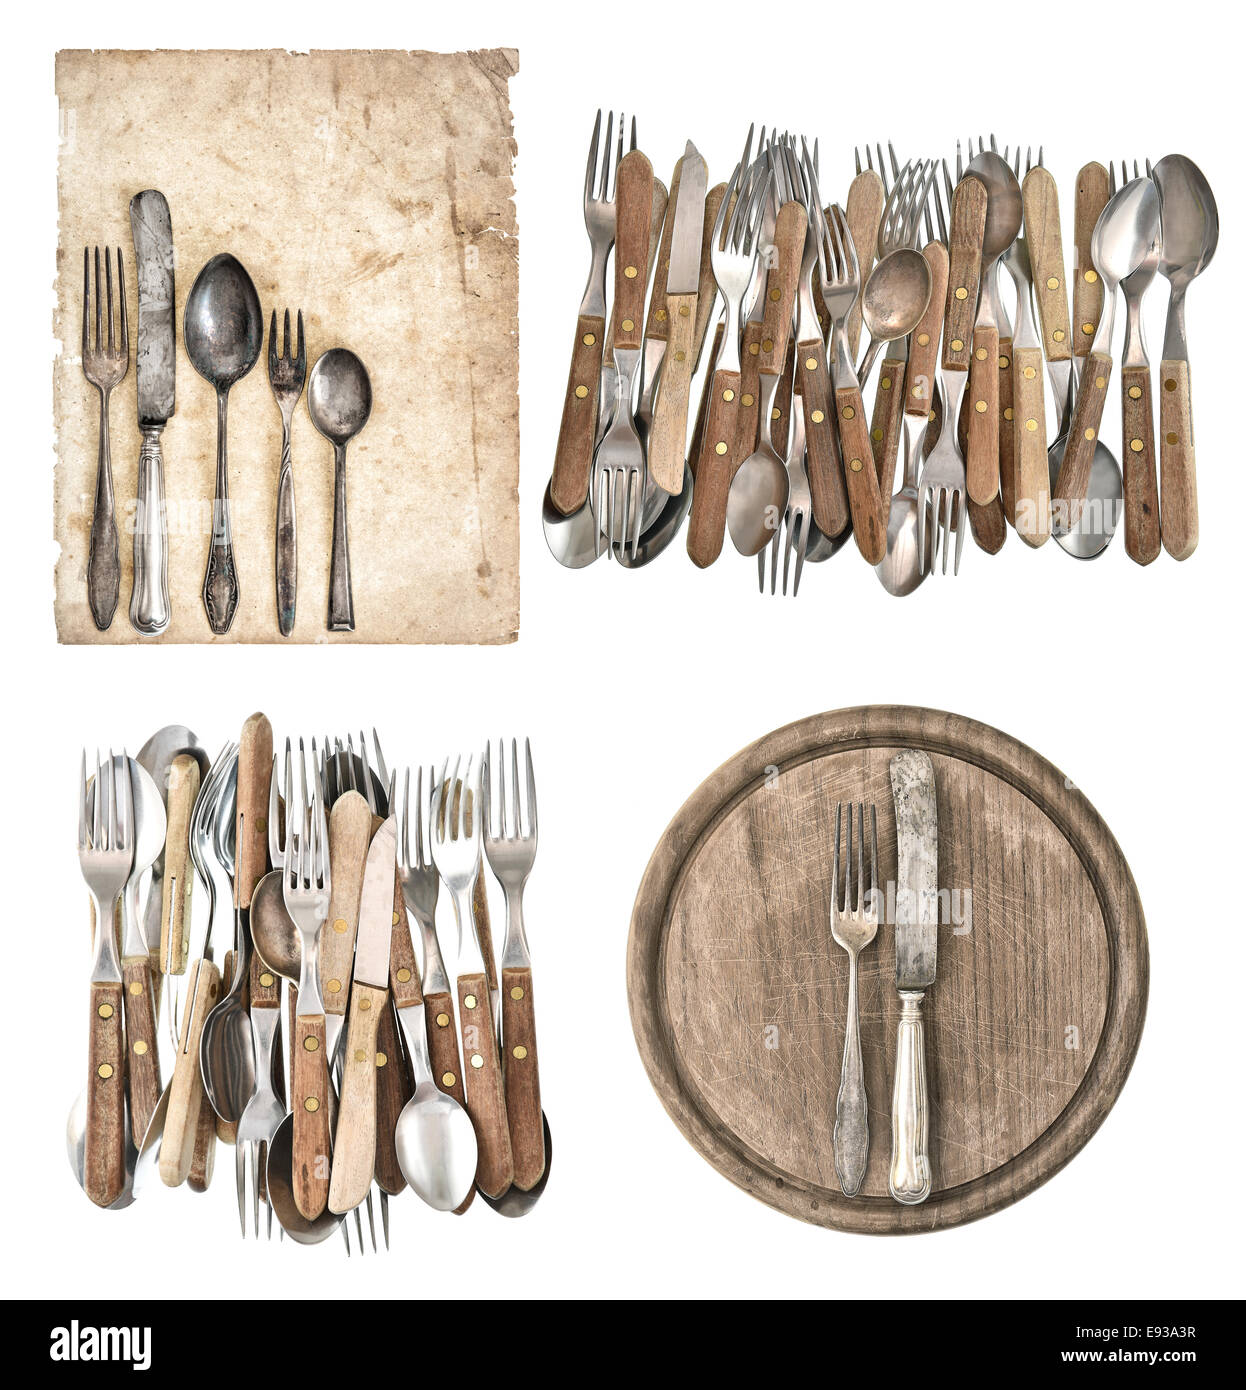 aged paper, kitchen board, antique kitchen utensils and vintage silver cutlery isolated on white background Stock Photo